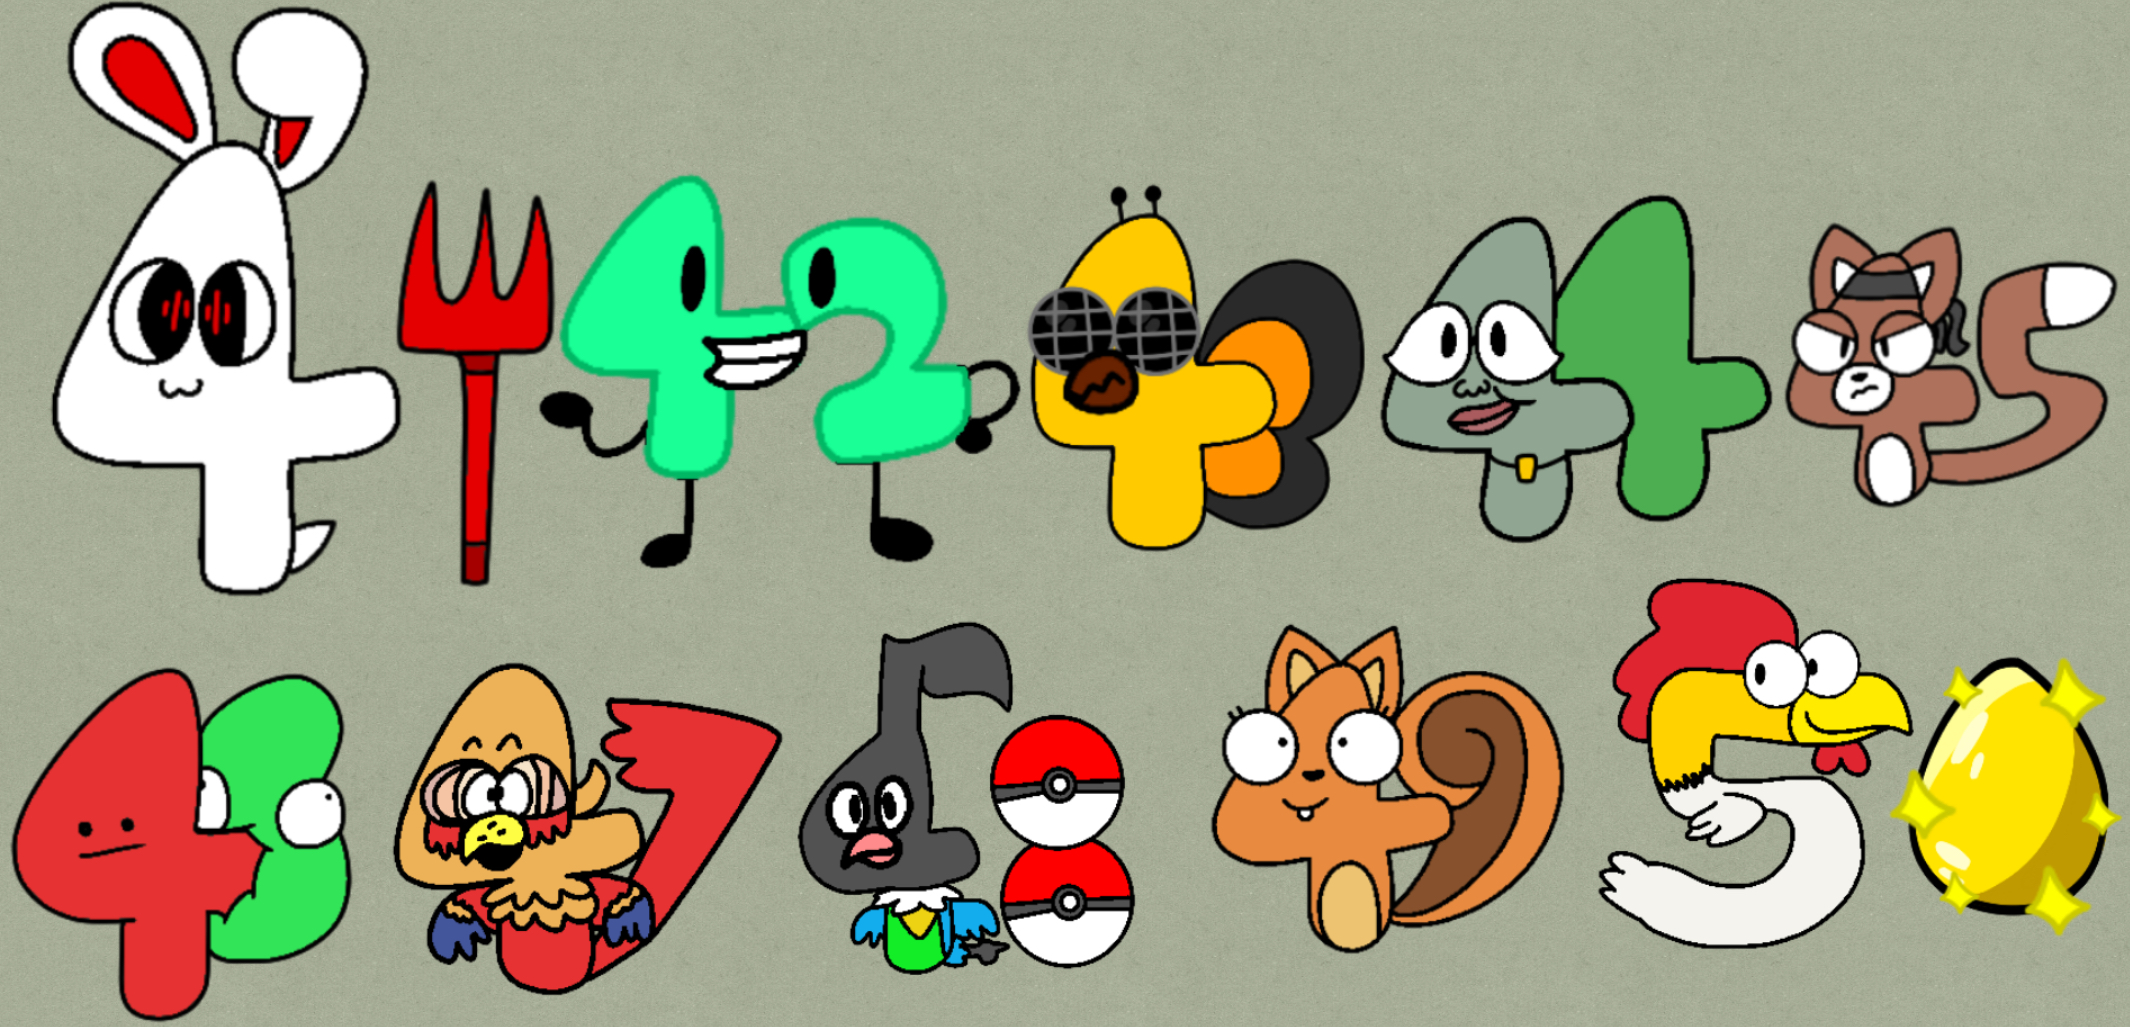 My Number Lore Halves And Quarters by FluffyIsCool2022 on DeviantArt